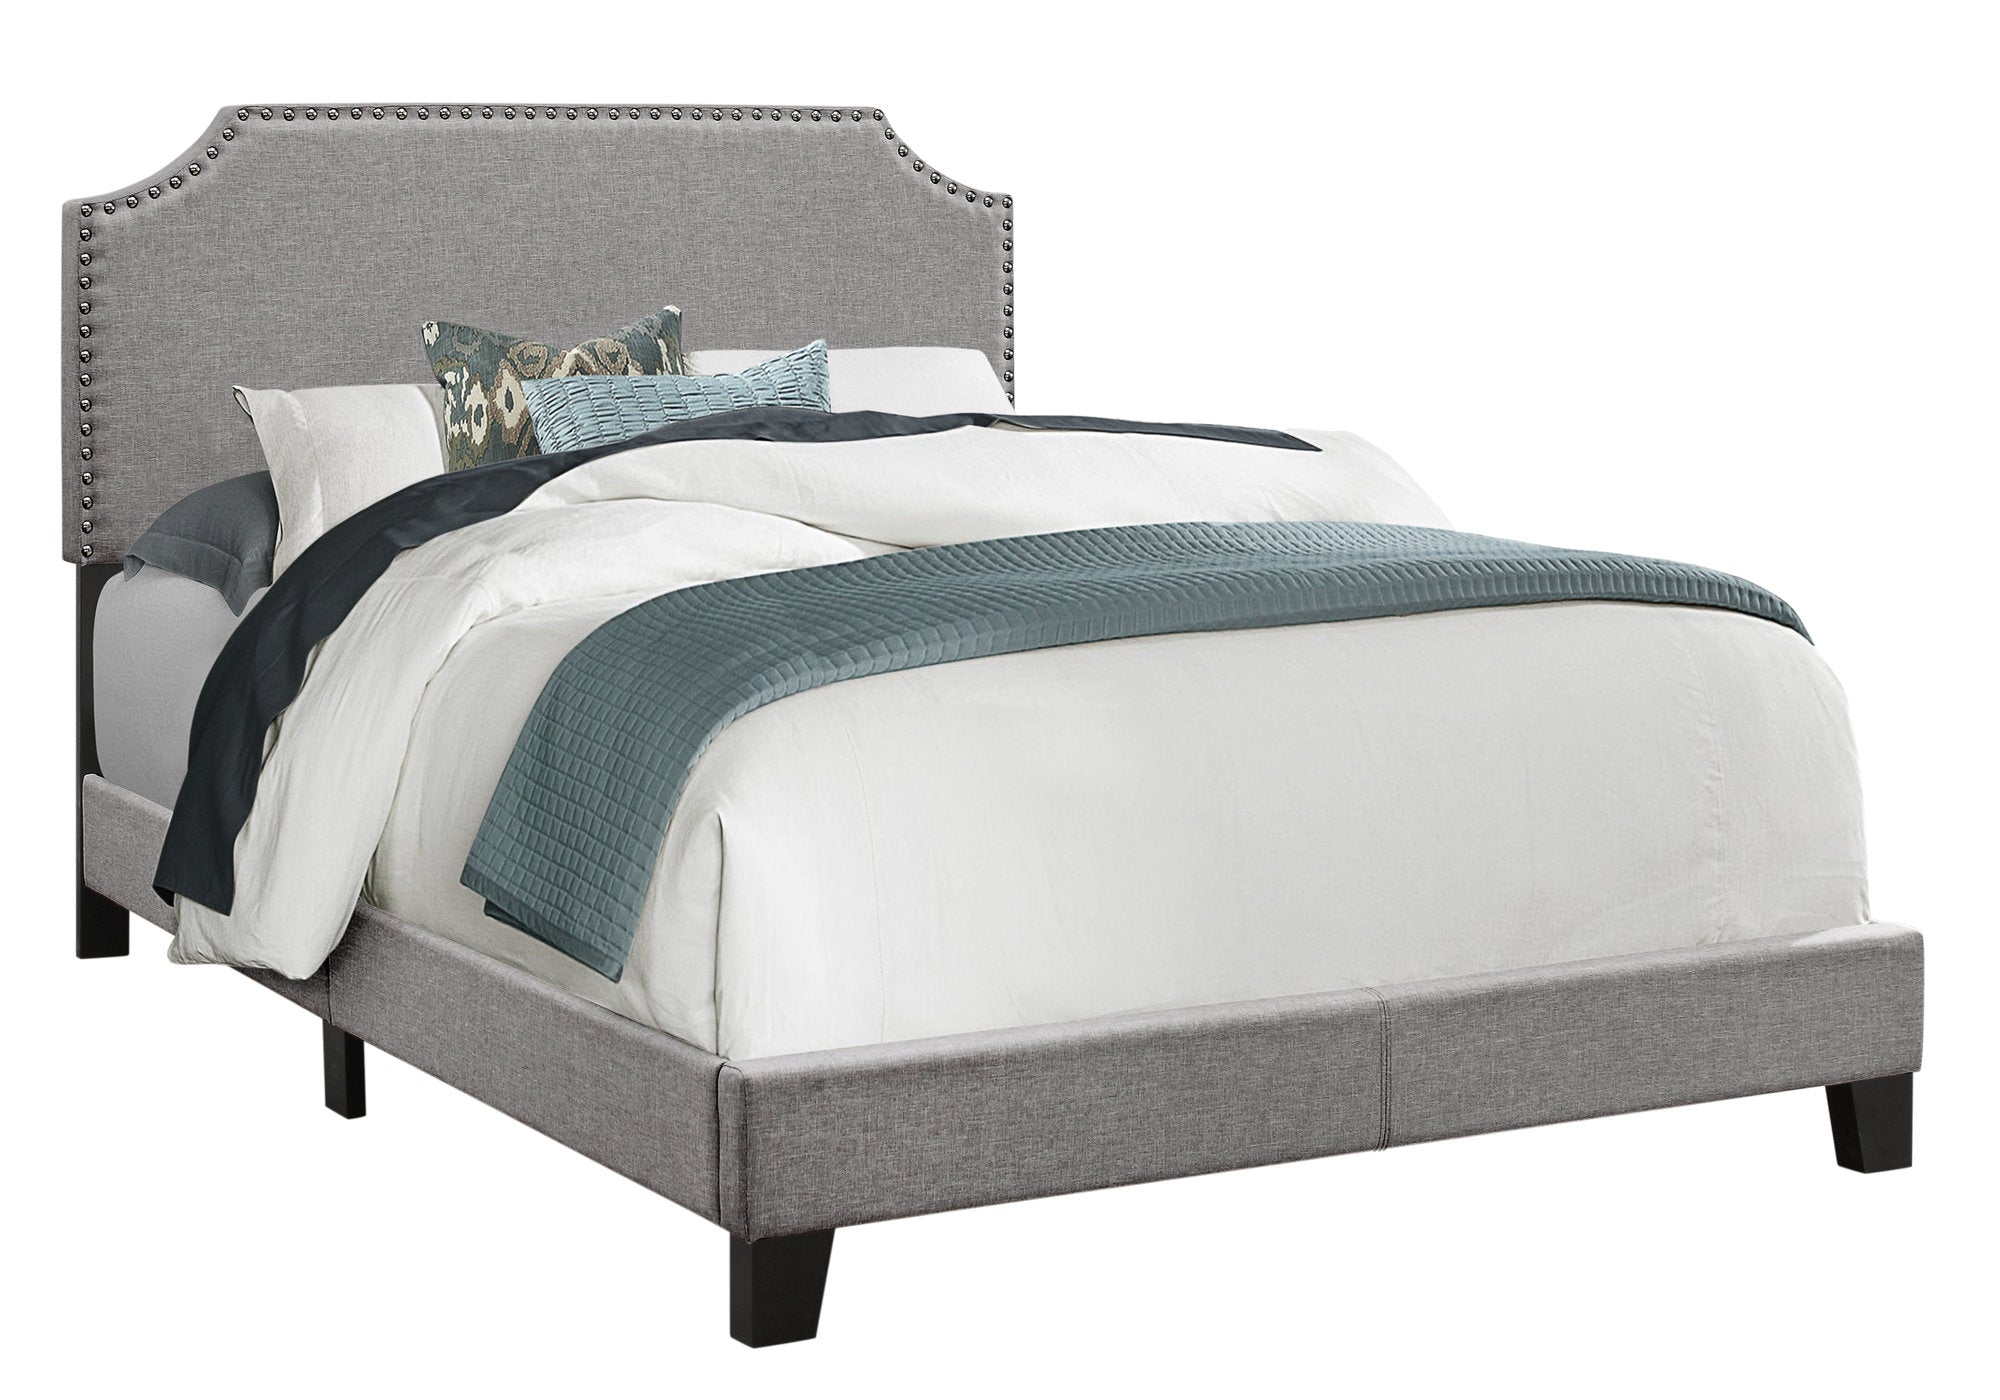 Bed - Full Size / Grey Linen With Chrome Trim